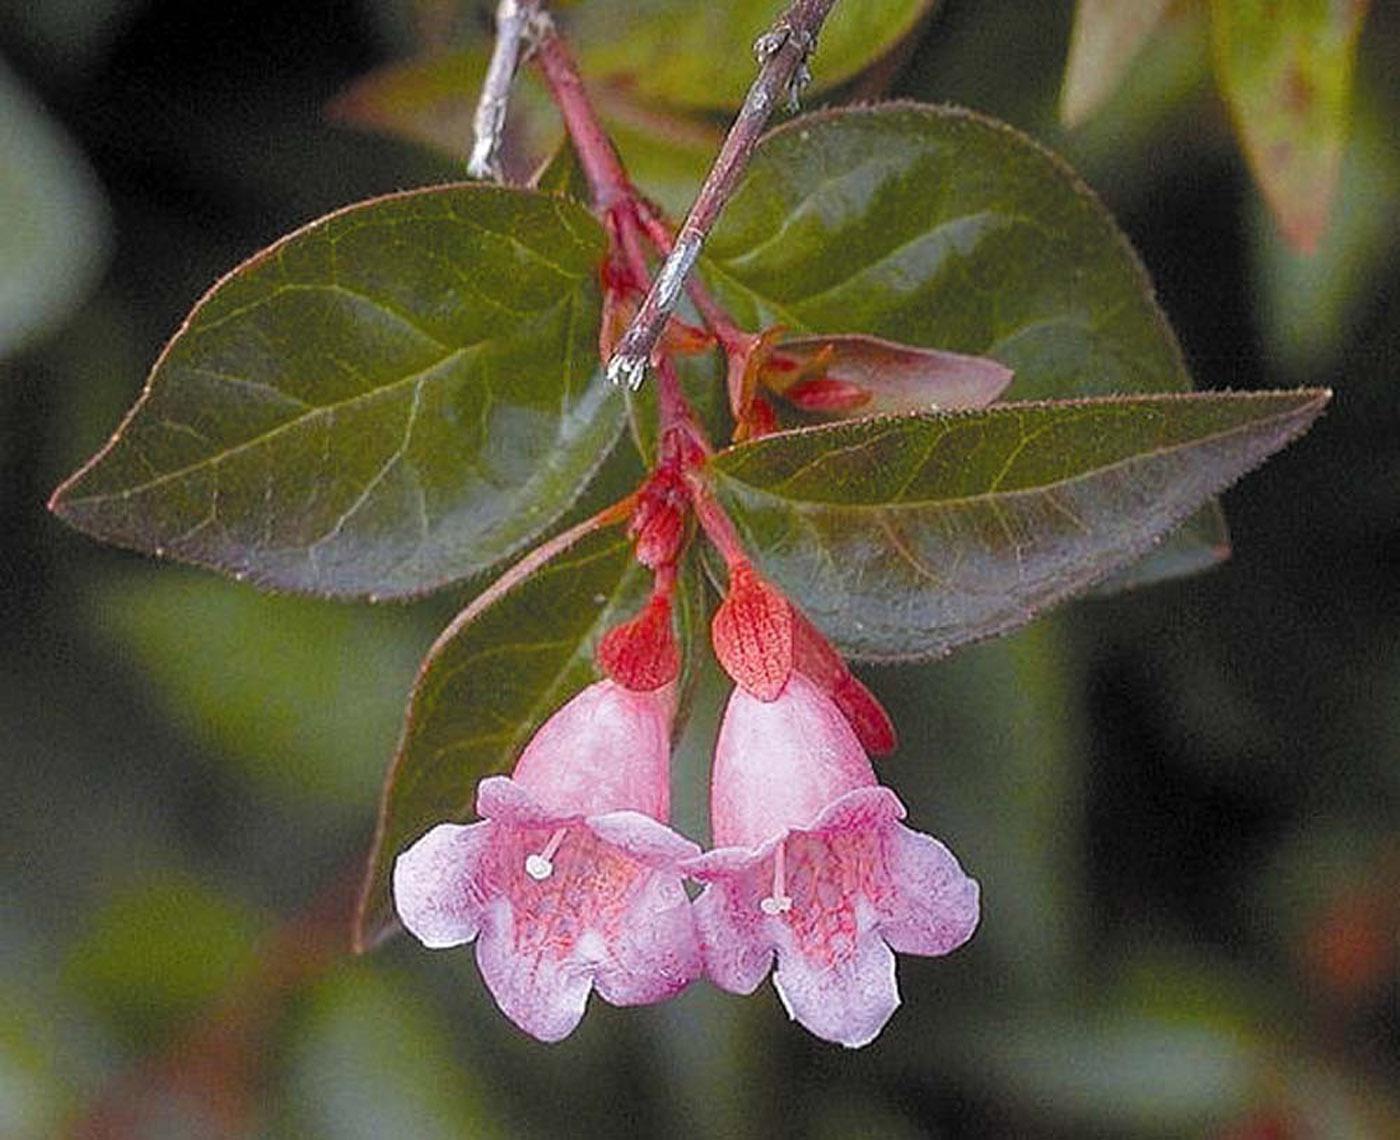 Edward Gaucher abelia is a 2003 Mississippi Medallion winner for its ability to thrive in the Hospitality State. This low-maintenance plant will yield months of blooms to delight hummingbirds, butterflies and people. 